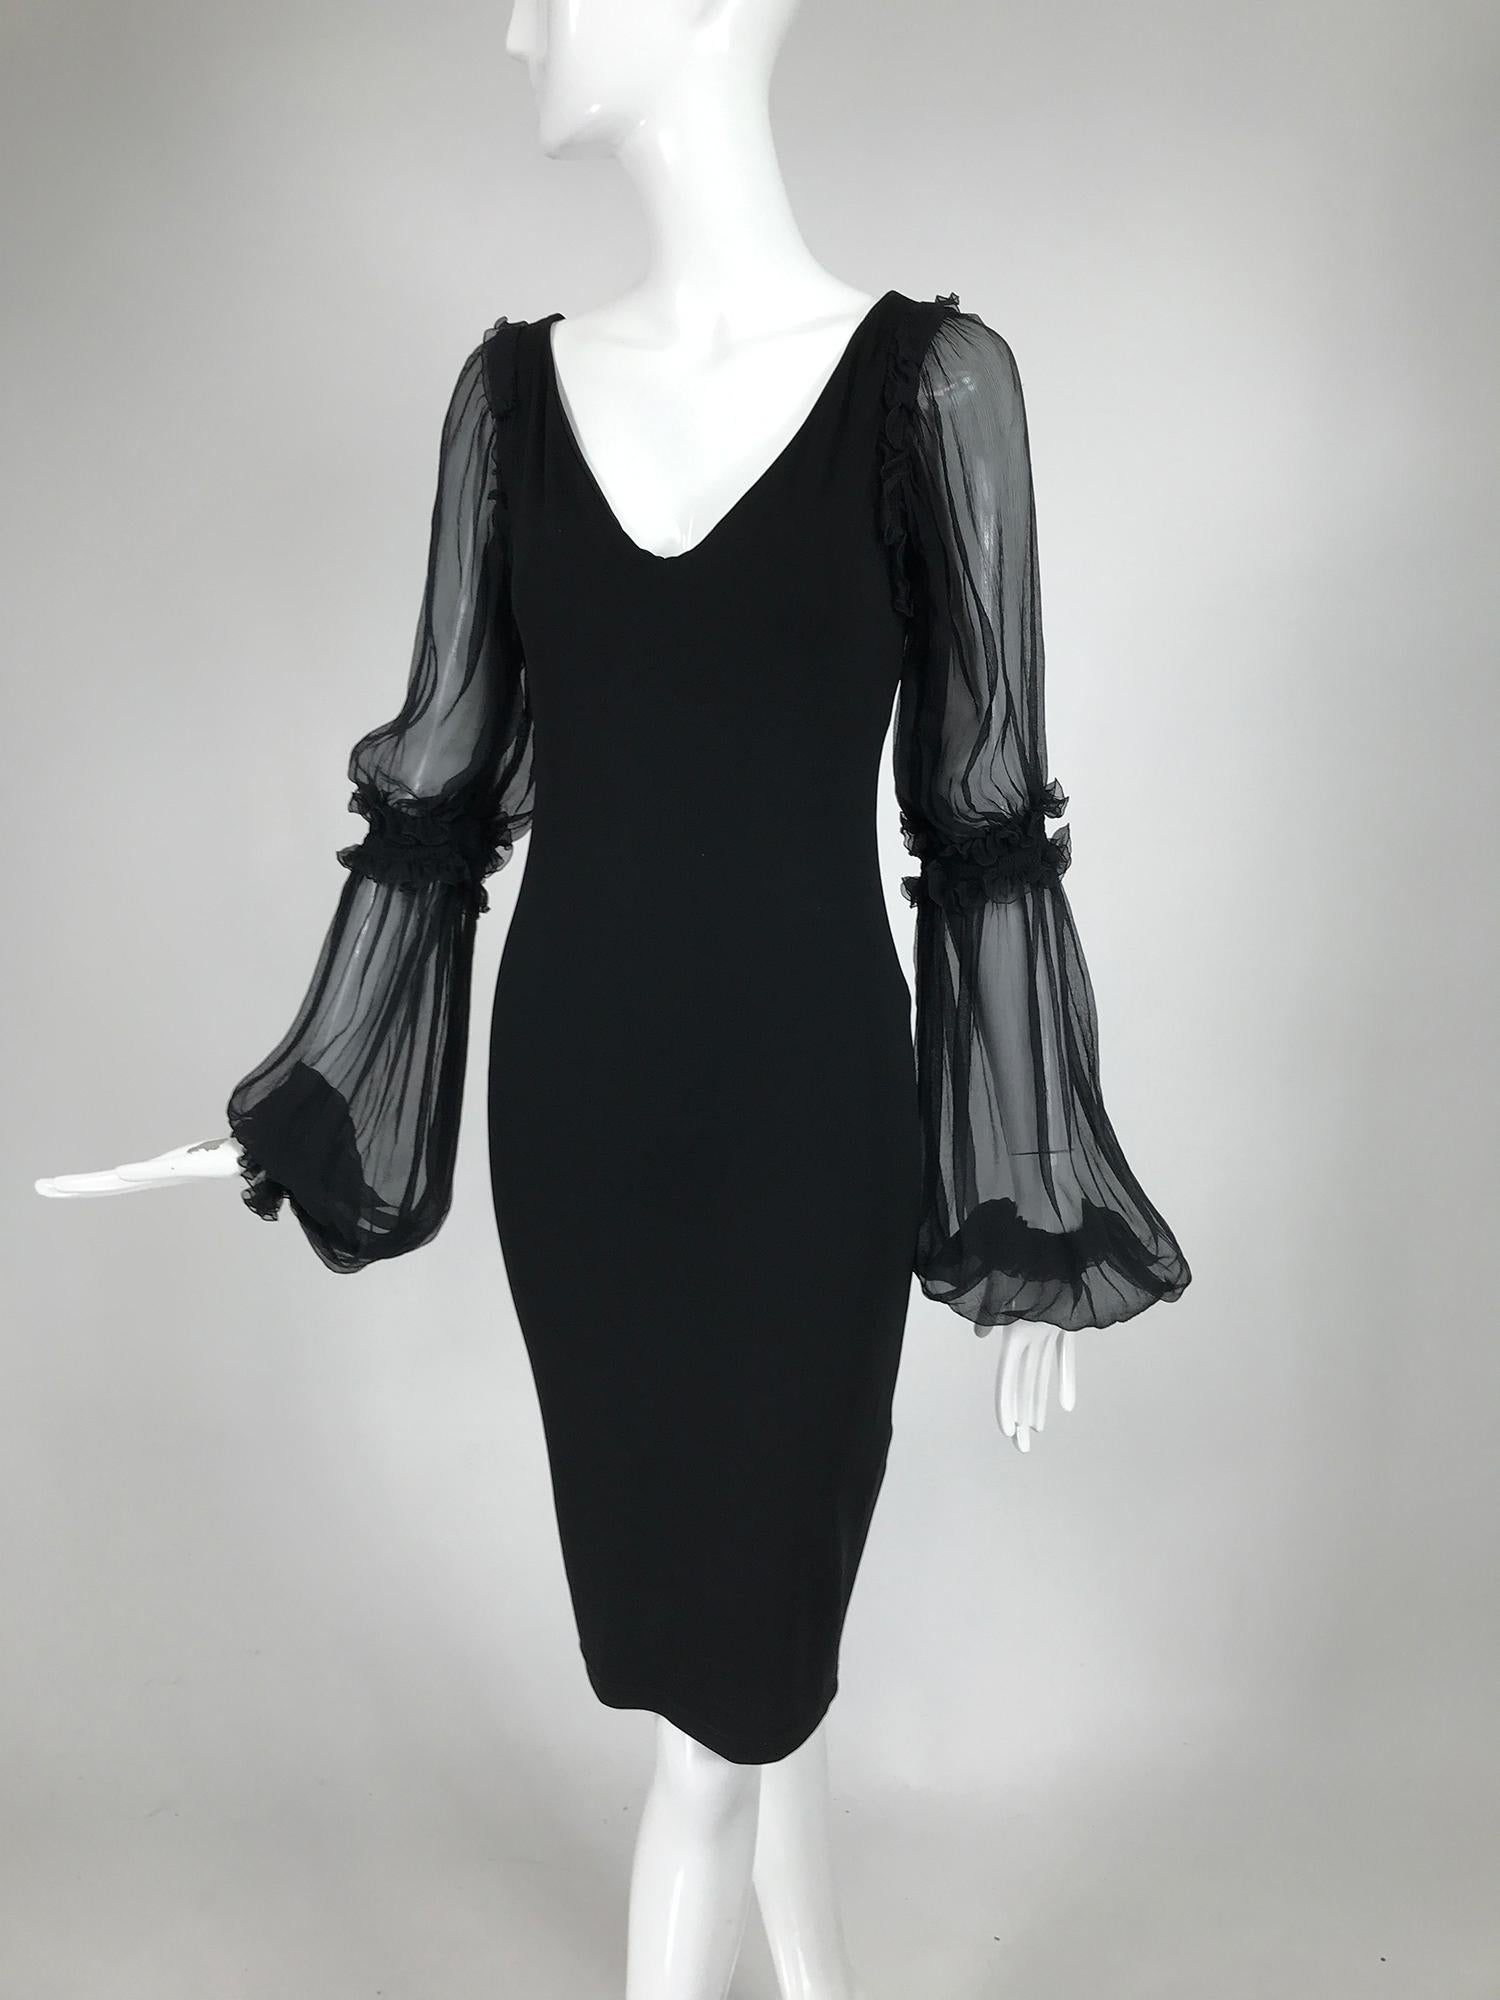 Roberto Cavalli black stretch jersey dress with gathered black chiffon sleeves. Fitted stretch dress has a v neckline and long sheer, full chiffon sleeves that are gathered at the elbow and wrist with cased elastic. The dress is self lined. Pull on